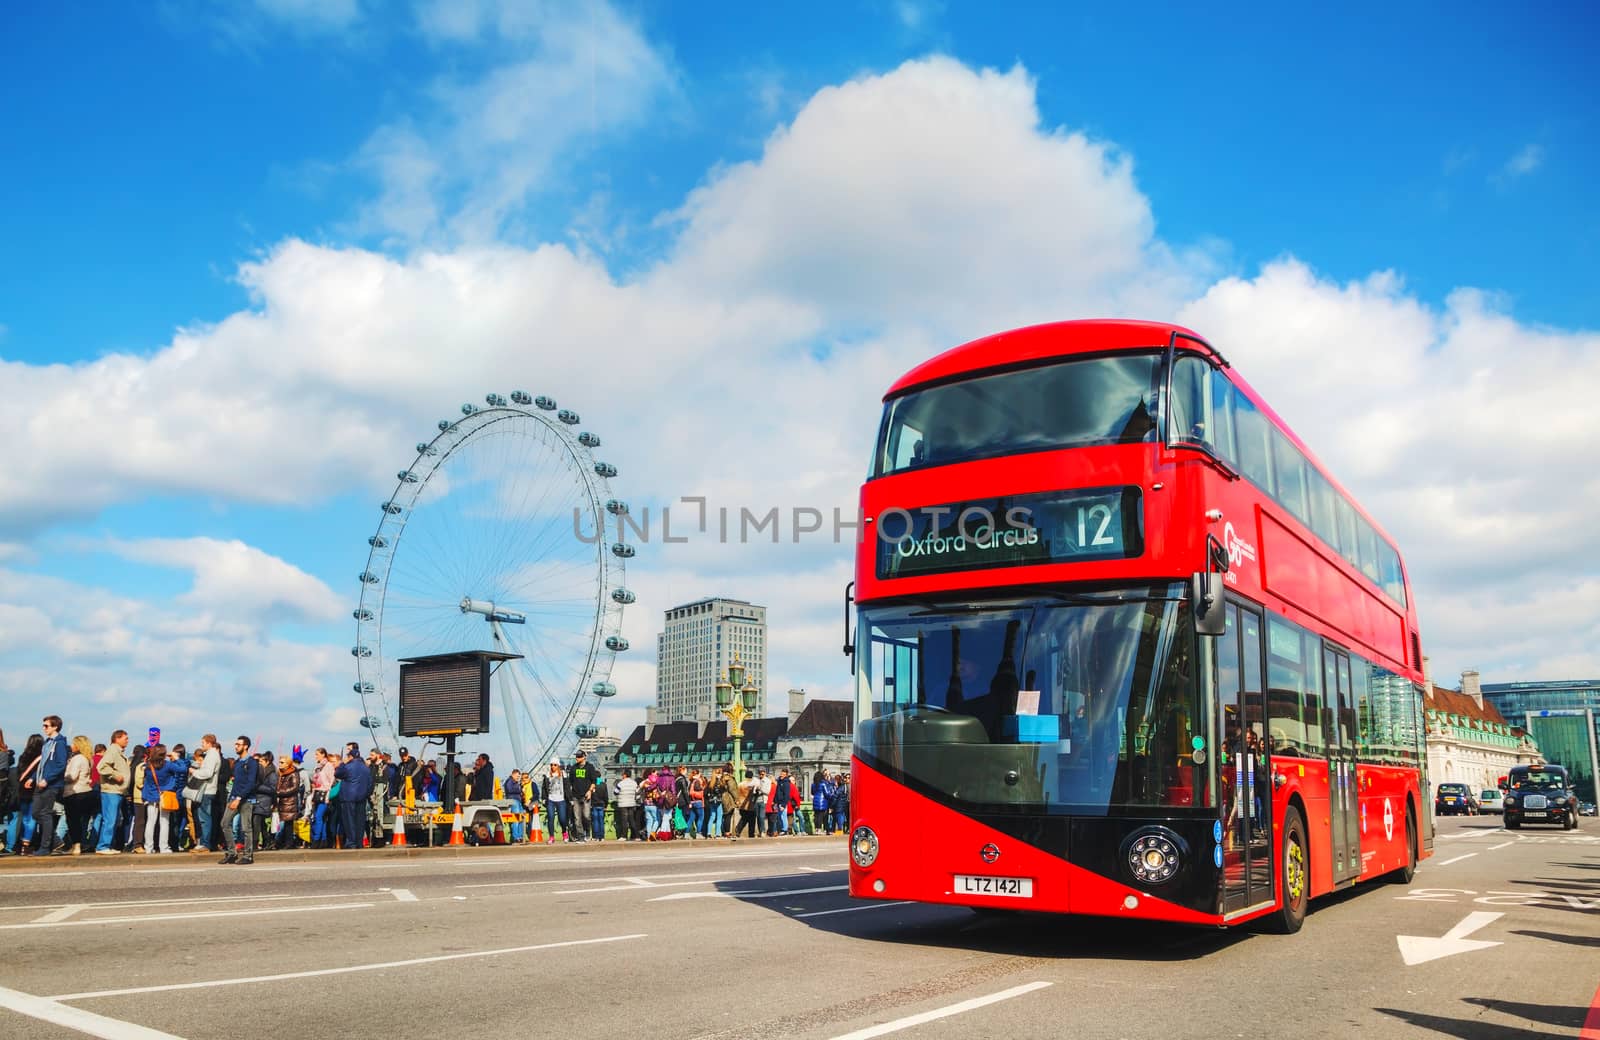 Iconic red double decker bus in London, UK by AndreyKr